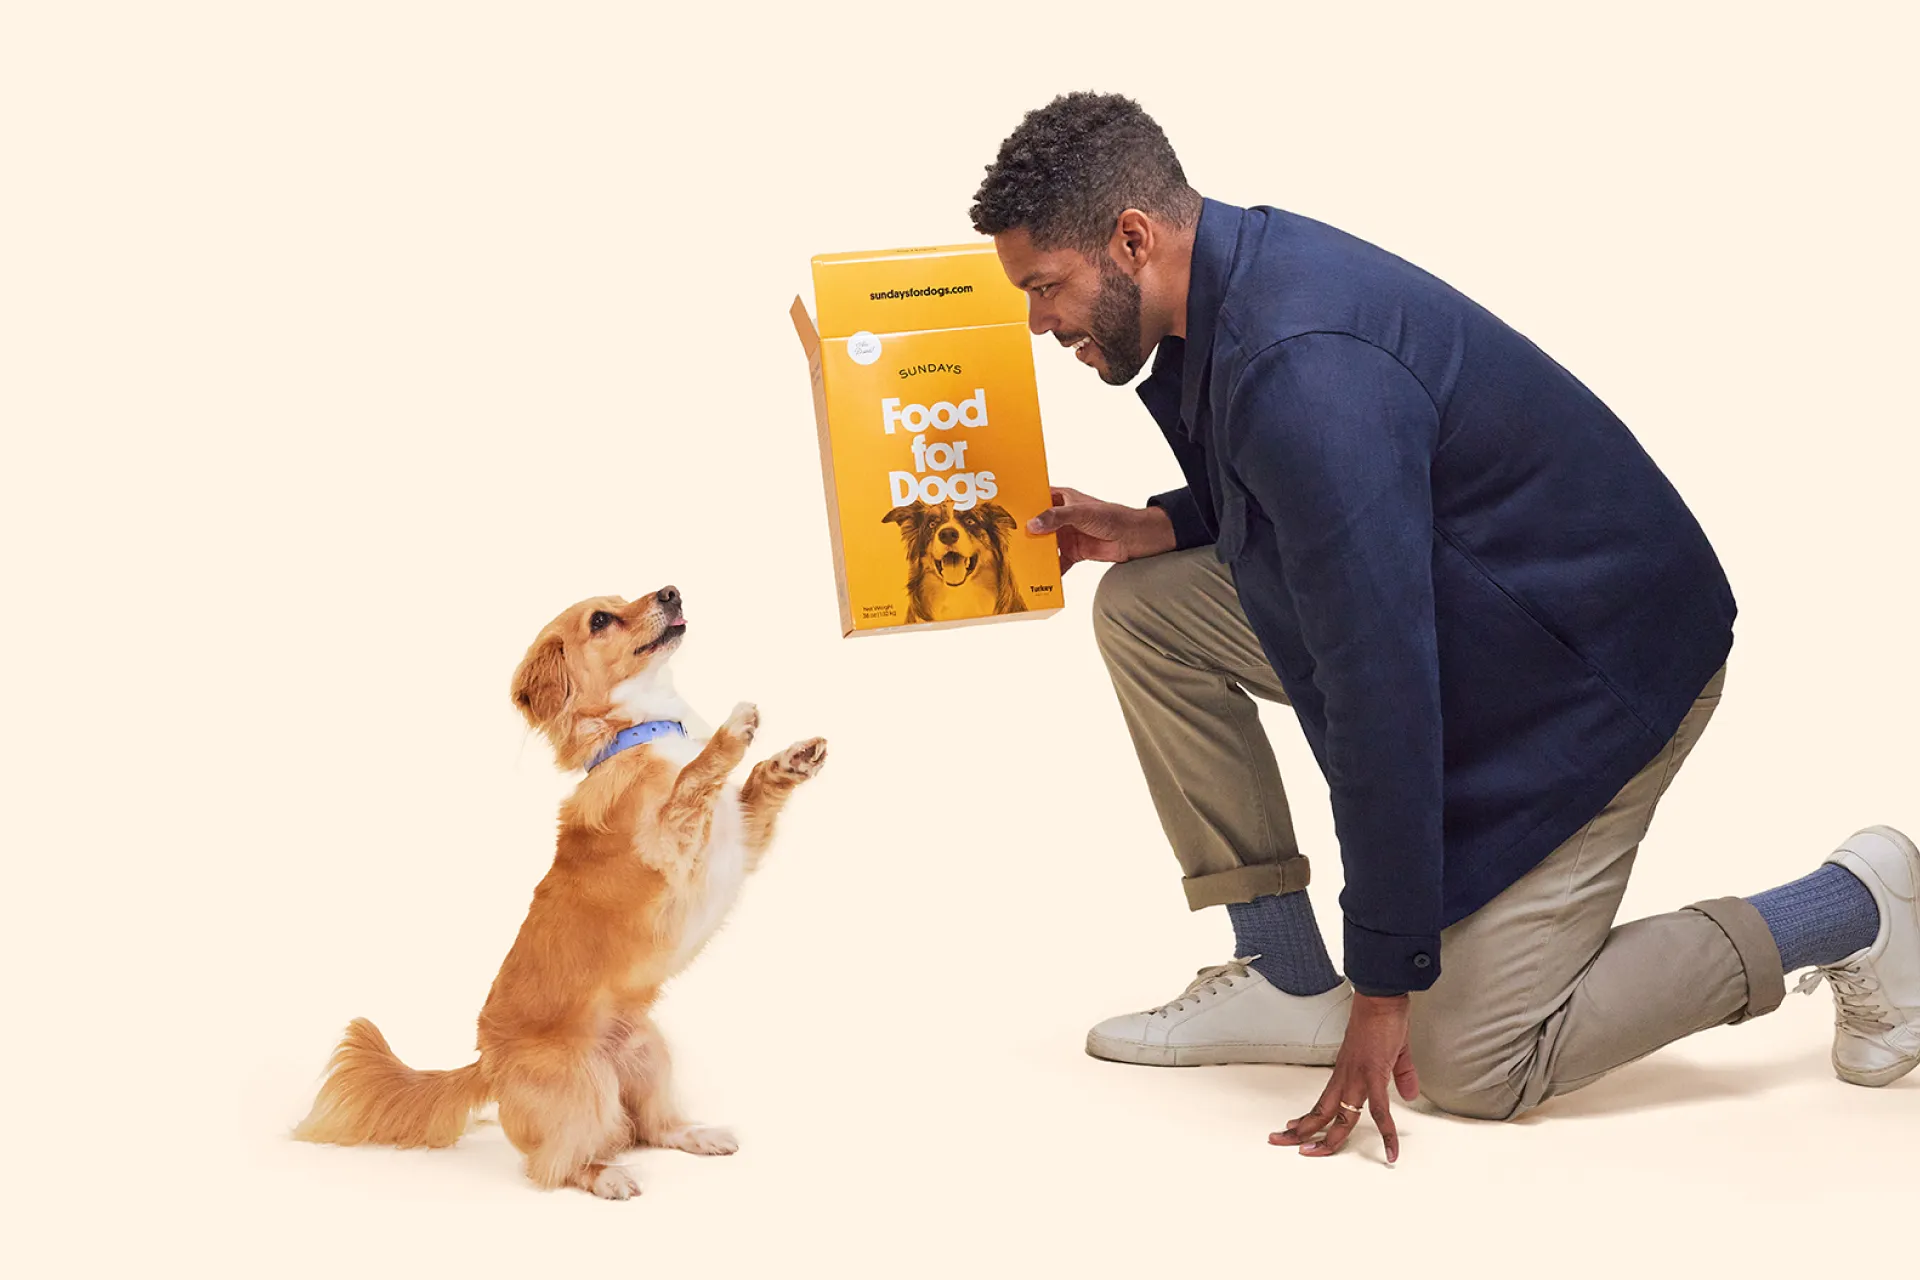 Small mixed breed dog excited by person bending down holding box of Sundays turkey dog food